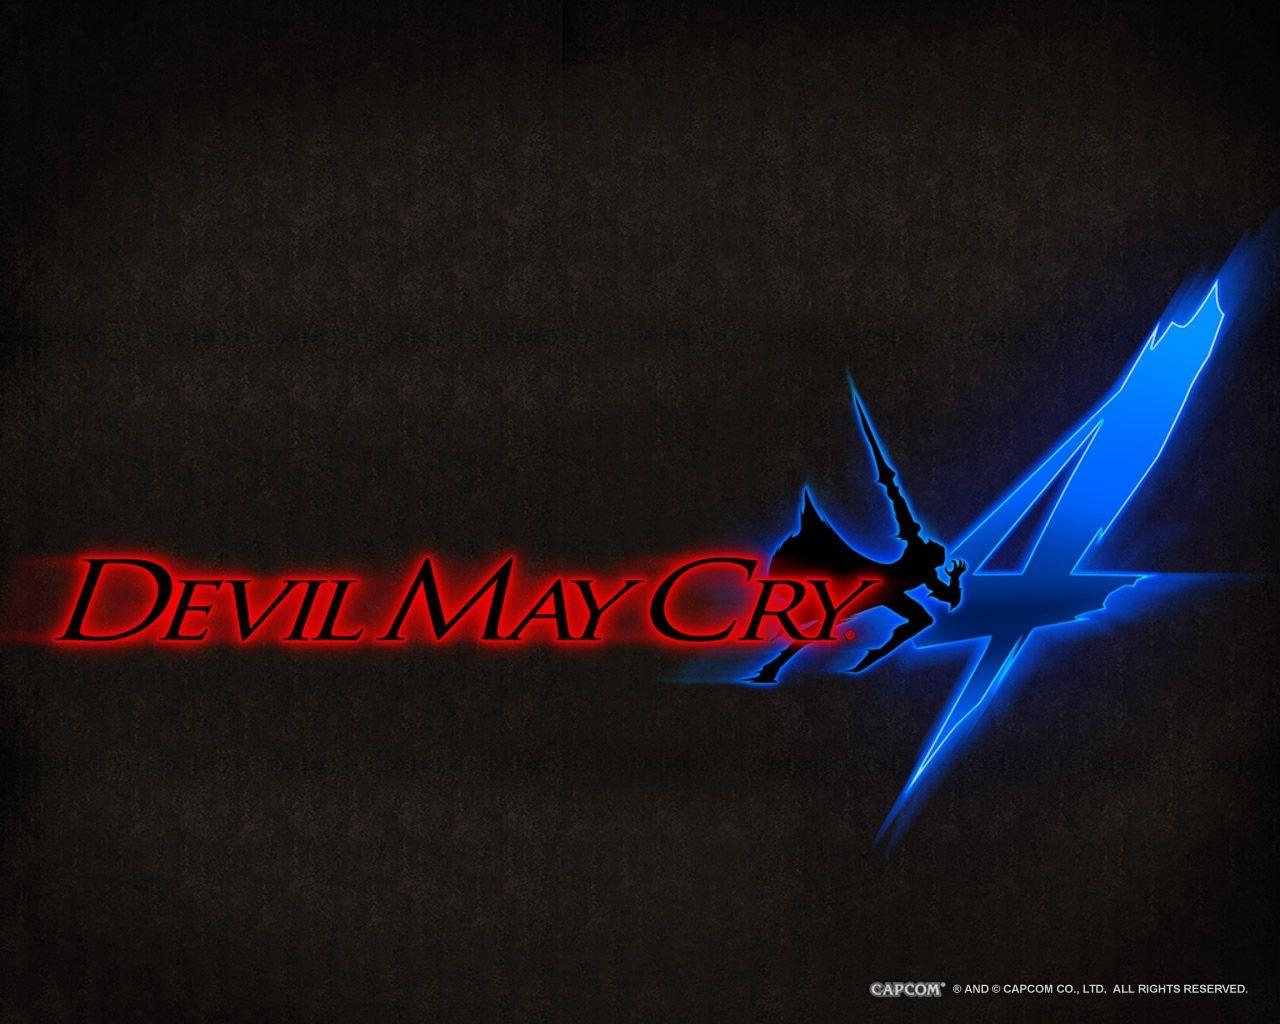 Download wallpapers 1280x1024 devil may cry 4, dmc 4, devil may cry